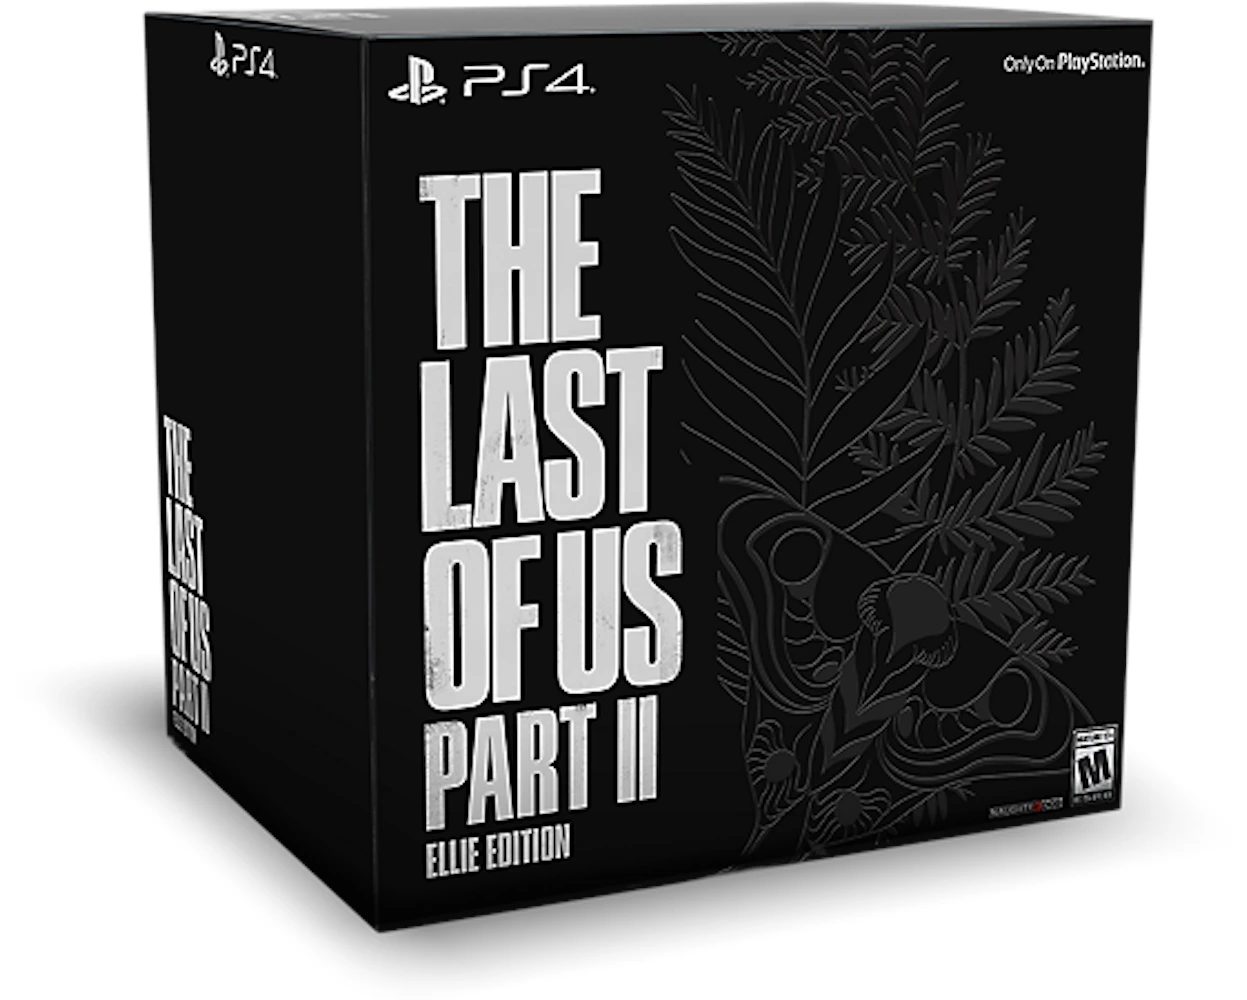  PlayStation 4 Pro 1TB Limited Edition The Last of Us Part 2  Console Bundle - Black : Video Games